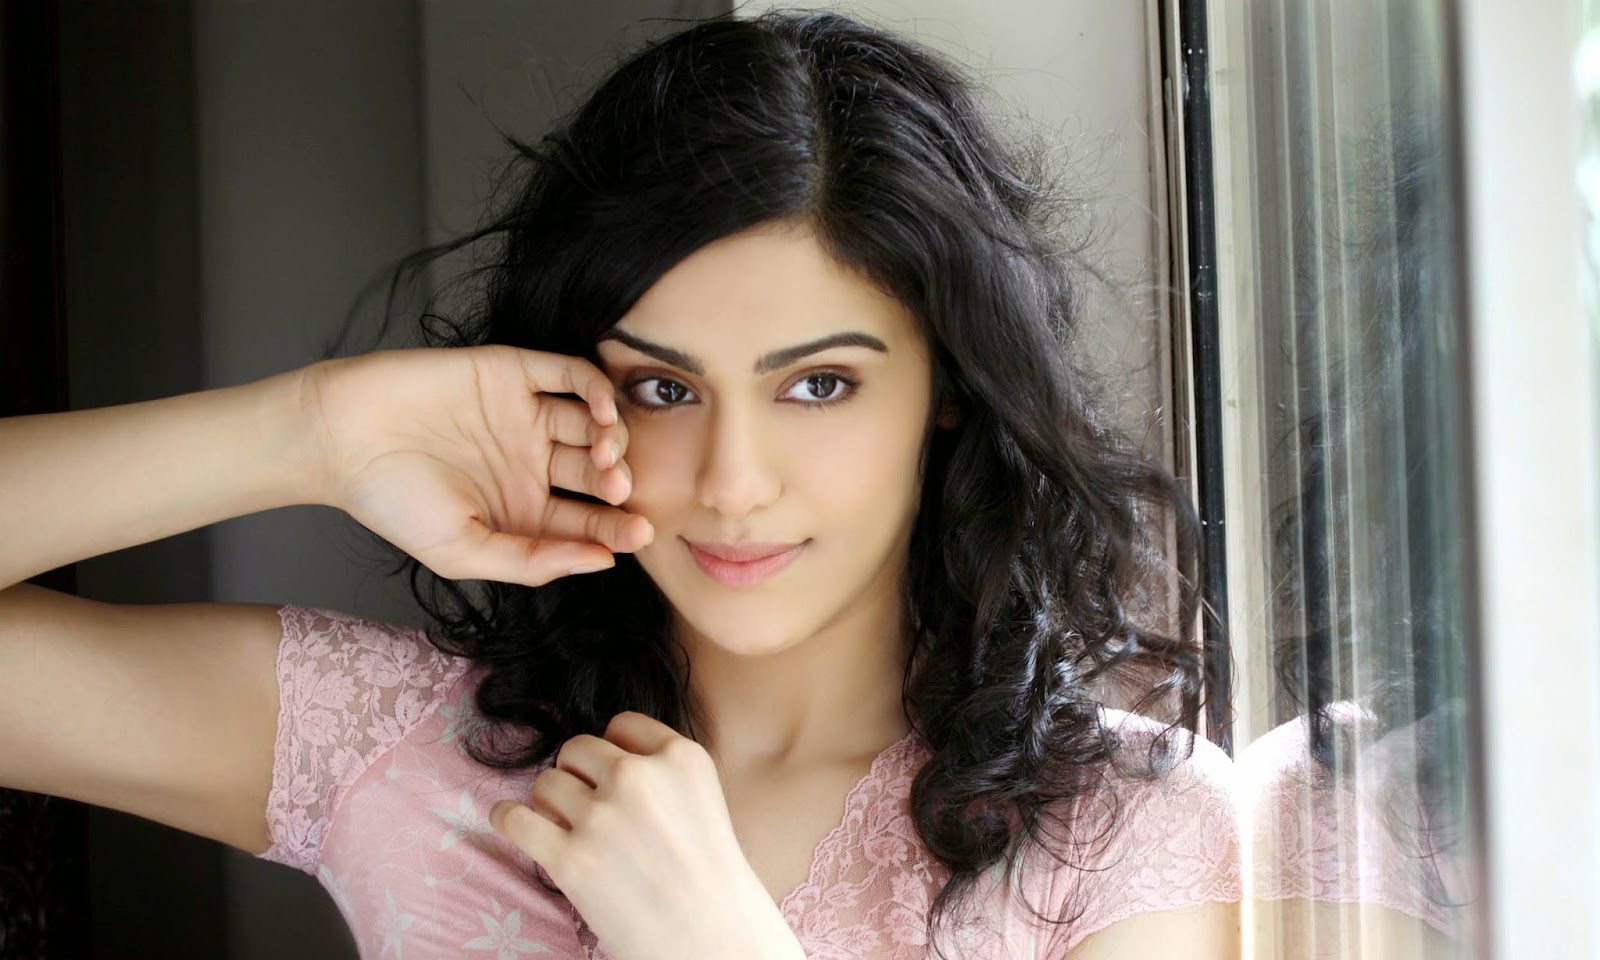 Lovely Adah Sharma Cute Face Free Mobile Desktop Hd Background Picures